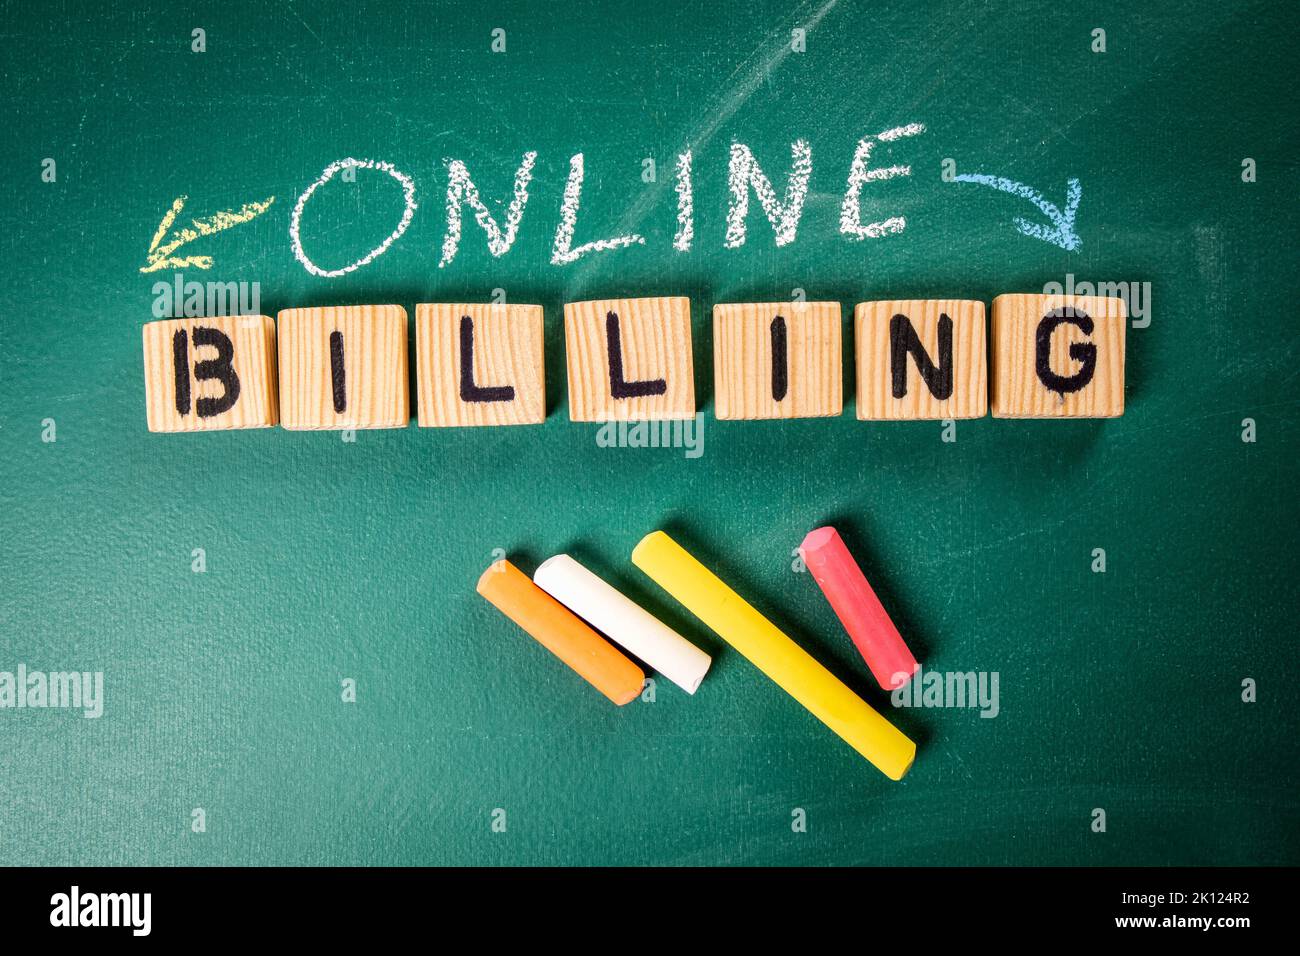 Online Billing concept. Wooden letter blocks and colored pieces of chalk on a green board. Stock Photo